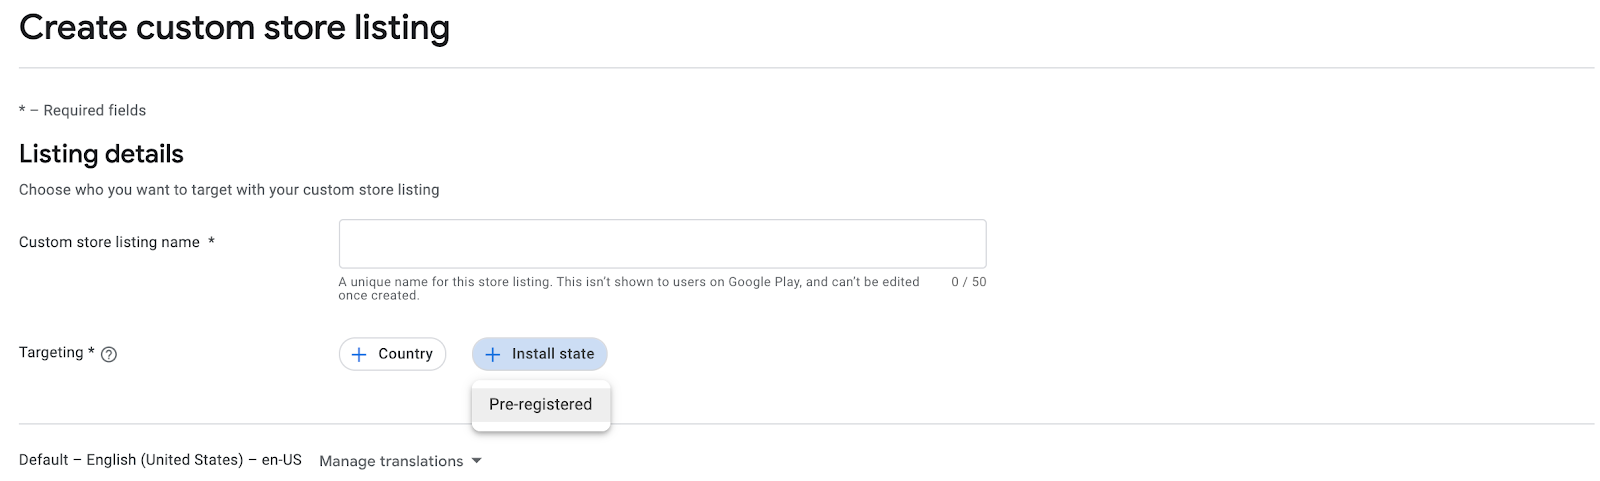 Google Play Console custom store listings creation interface